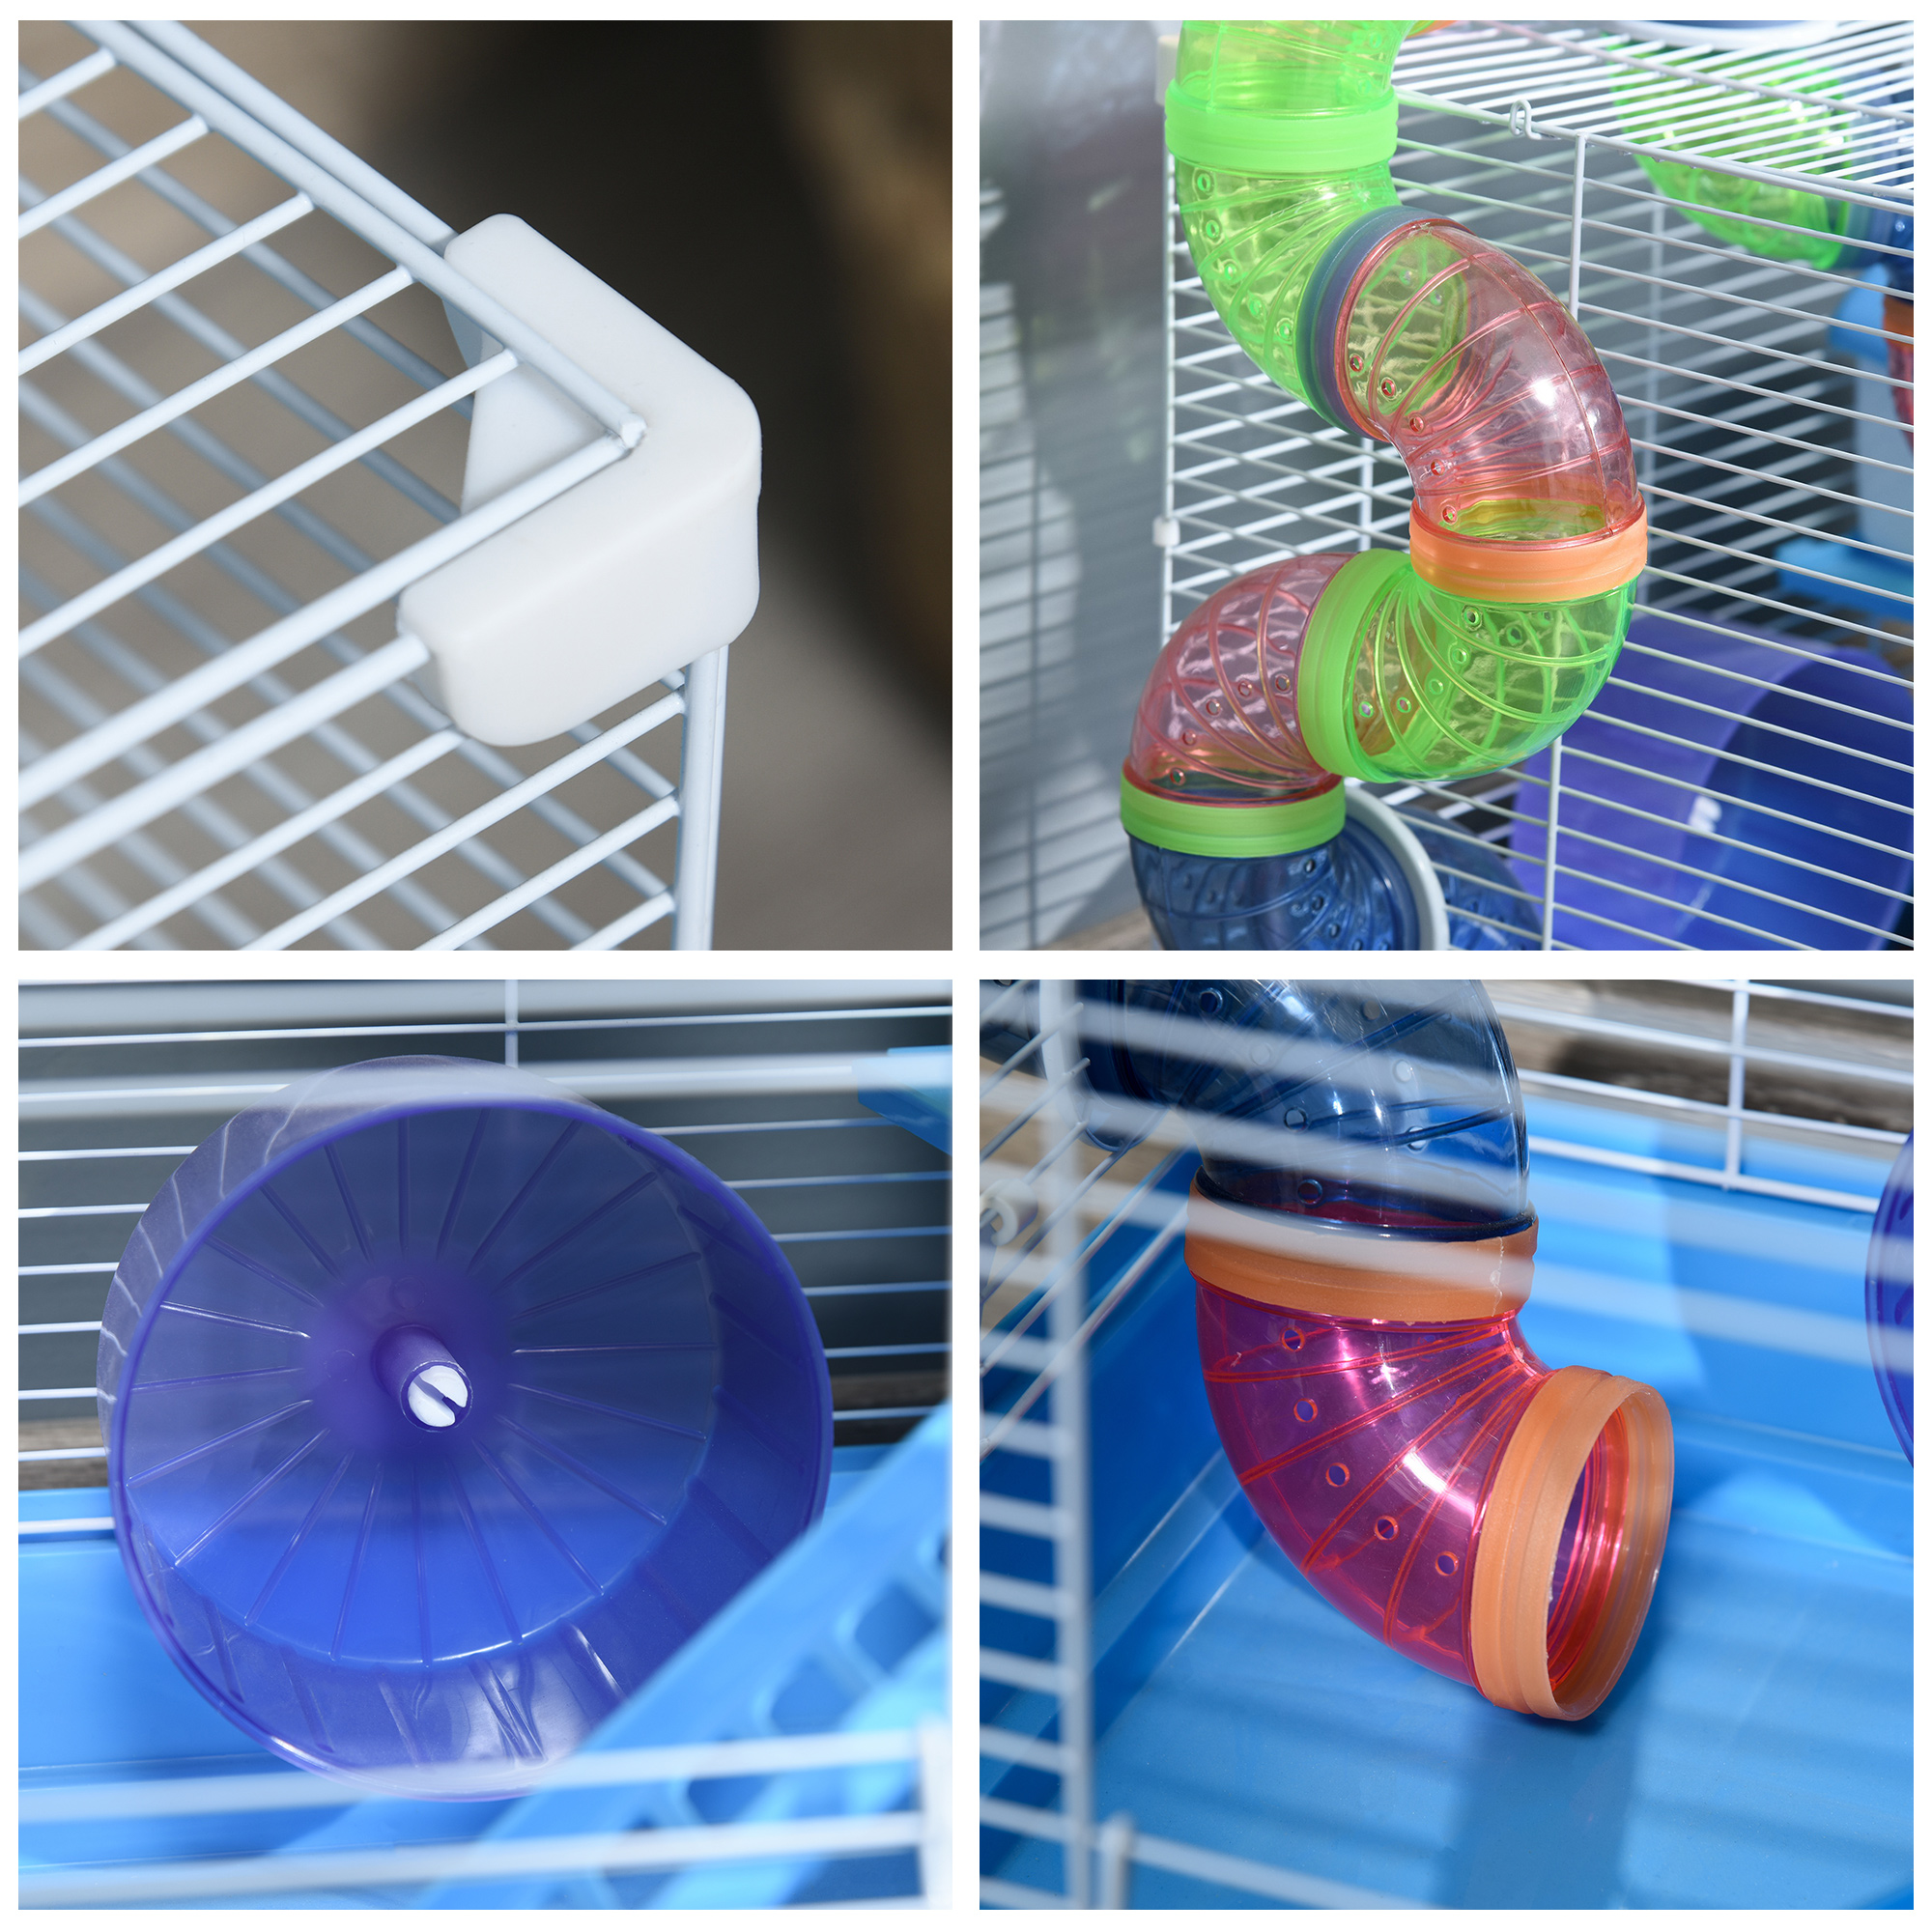 Pawhut 2-Level Hamster Cage Gerbil House Habitat Kit Small Animal Travel Carrier with Exercise Wheel, Play Tubes, Water Bottle, Food Dishes, & Interior Ladder - image 3 of 10